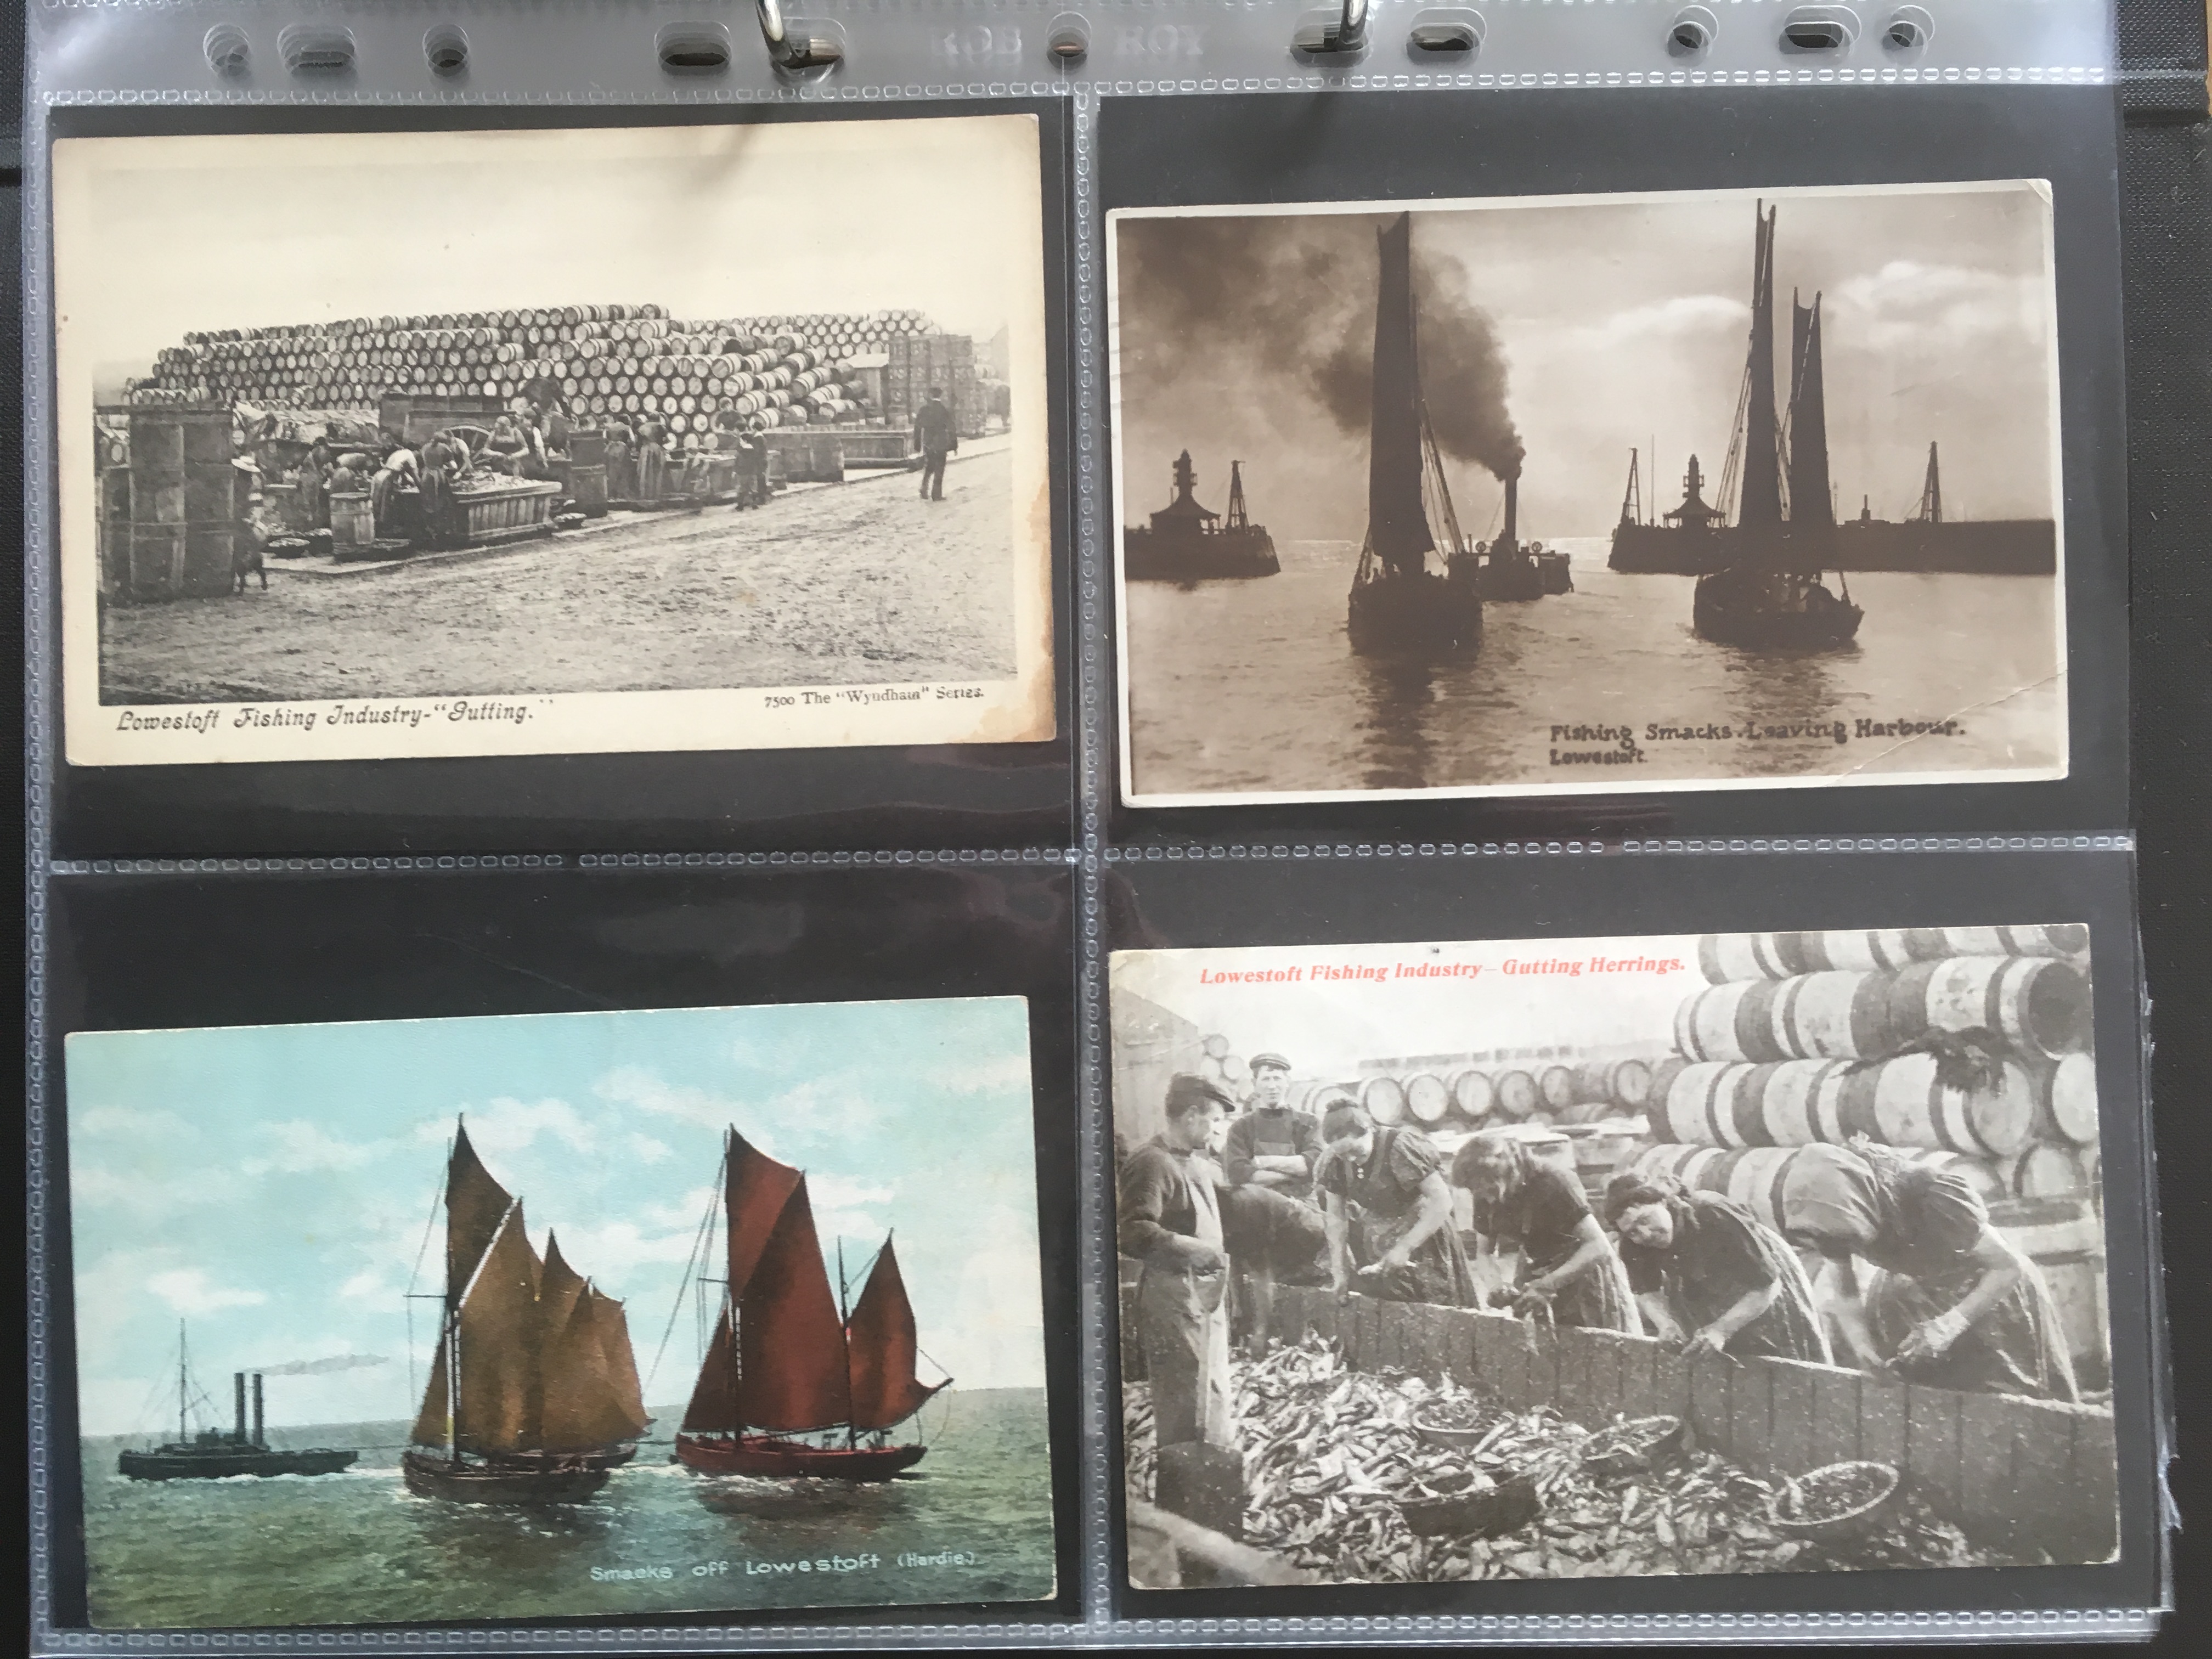 SUFFOLK: ALBUM WITH A COLLECTION OF LOWESTOFT FISHING INDUSTRY POSTCARDS, HARBOUR, DRIFTERS, - Image 8 of 9